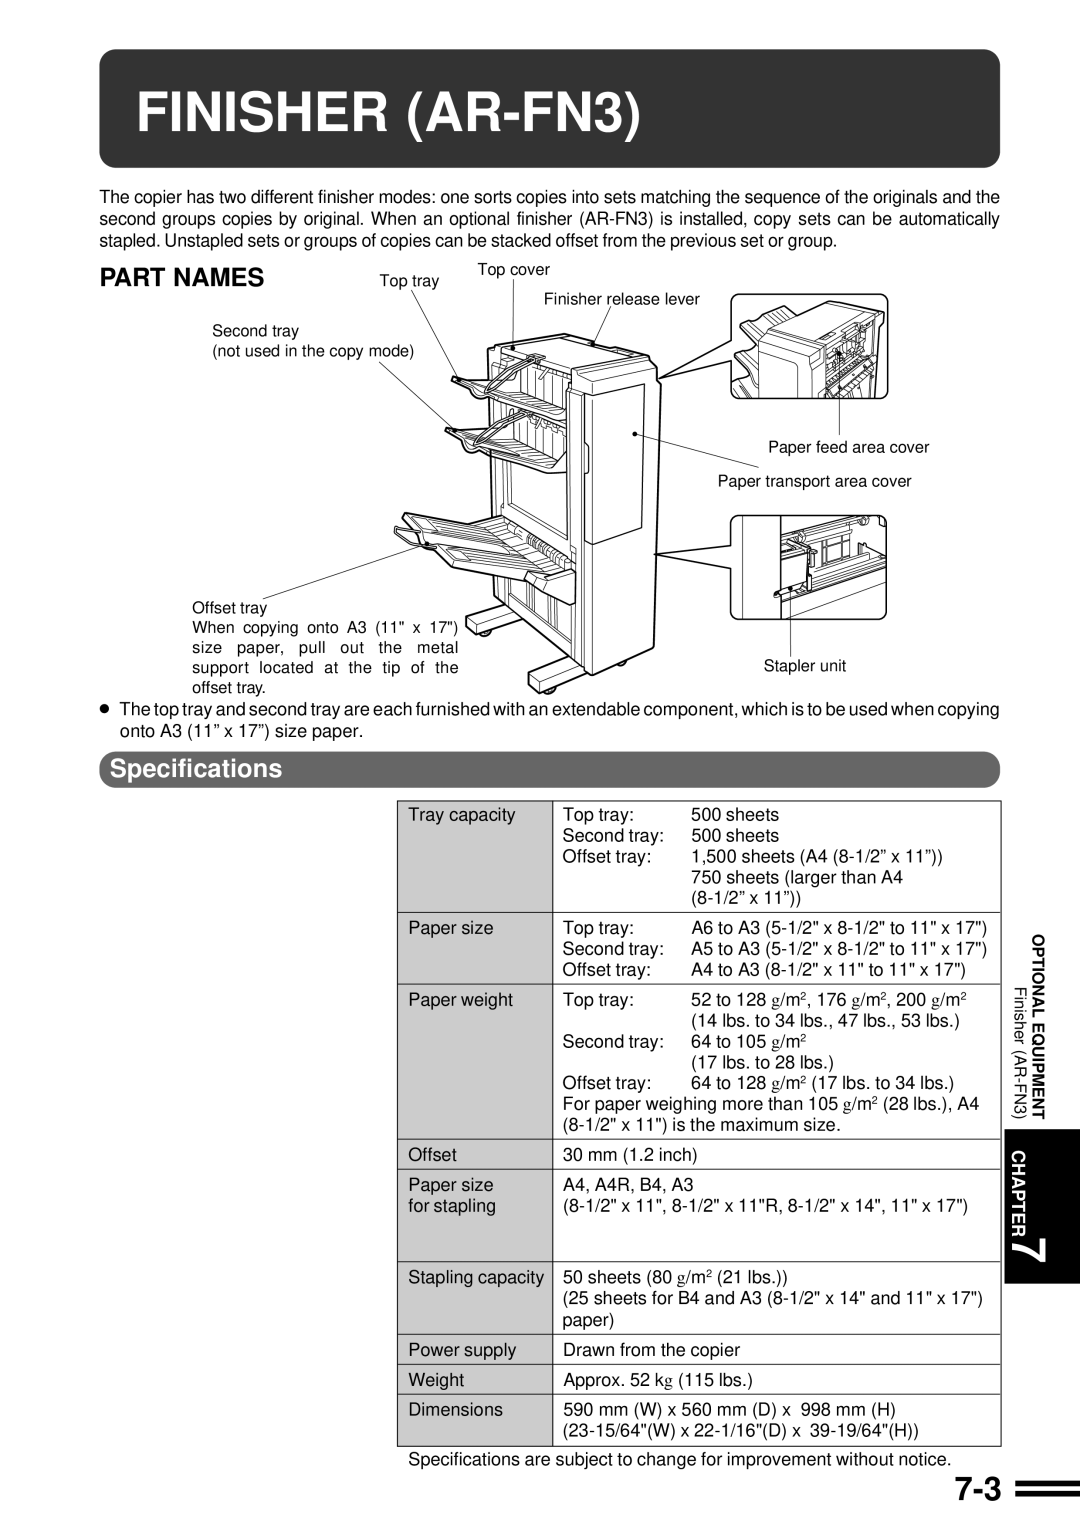 Sharp AR-507 operation manual FINISHER AR-FN3, Part Names, Specifications 